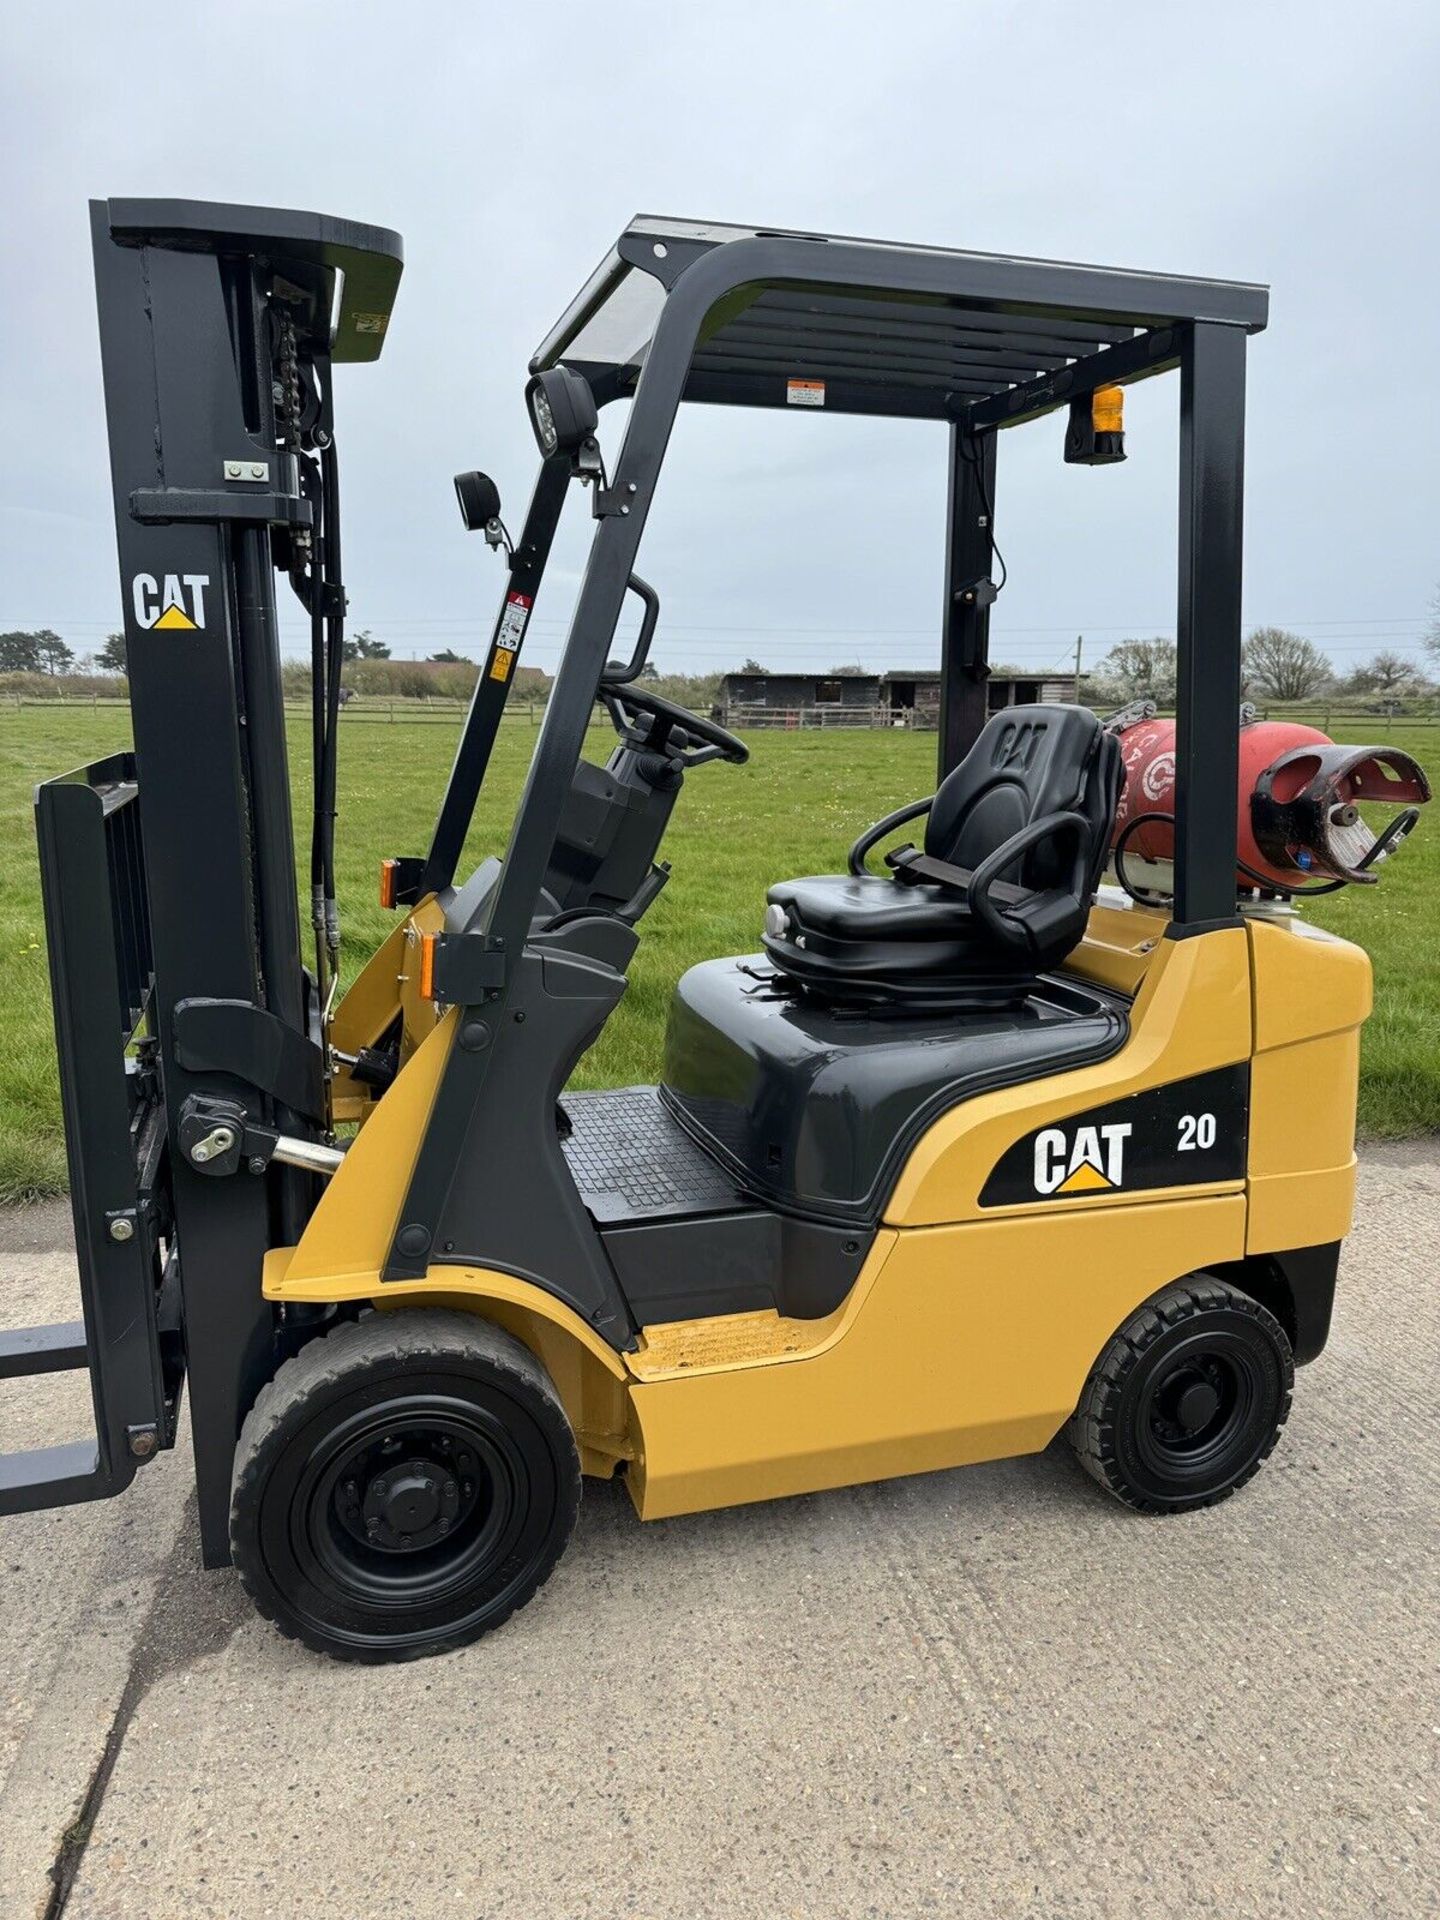 2017, CATERPILLAR - 2 Tonne Gas Forklift (Only 1235 Hours) - Image 6 of 6